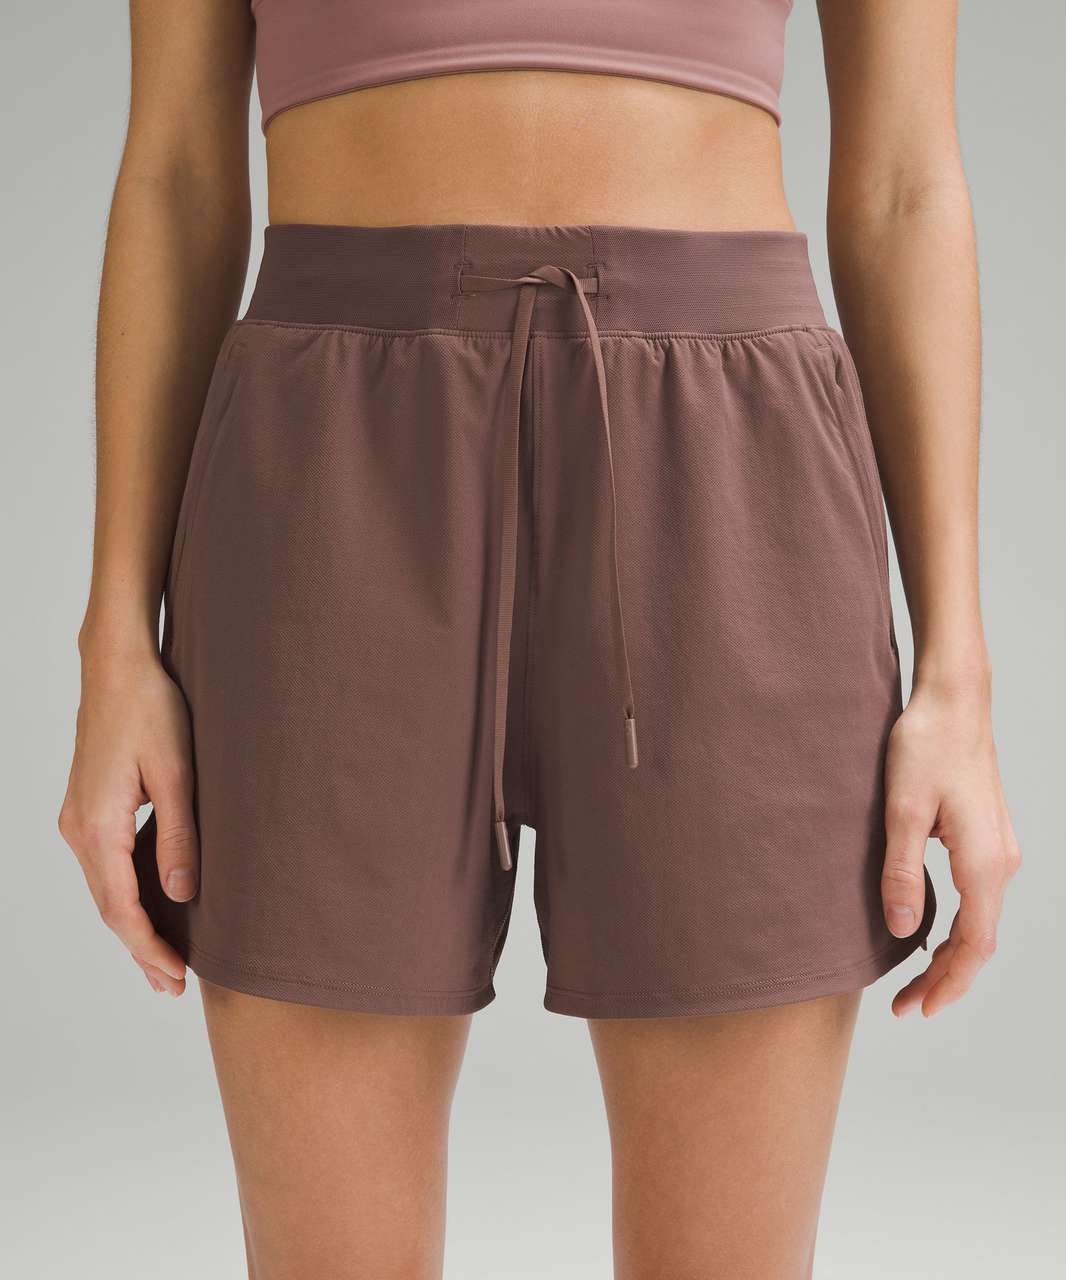 Lululemon License to Train Short 5” Linerless Size Large DEWY 07030